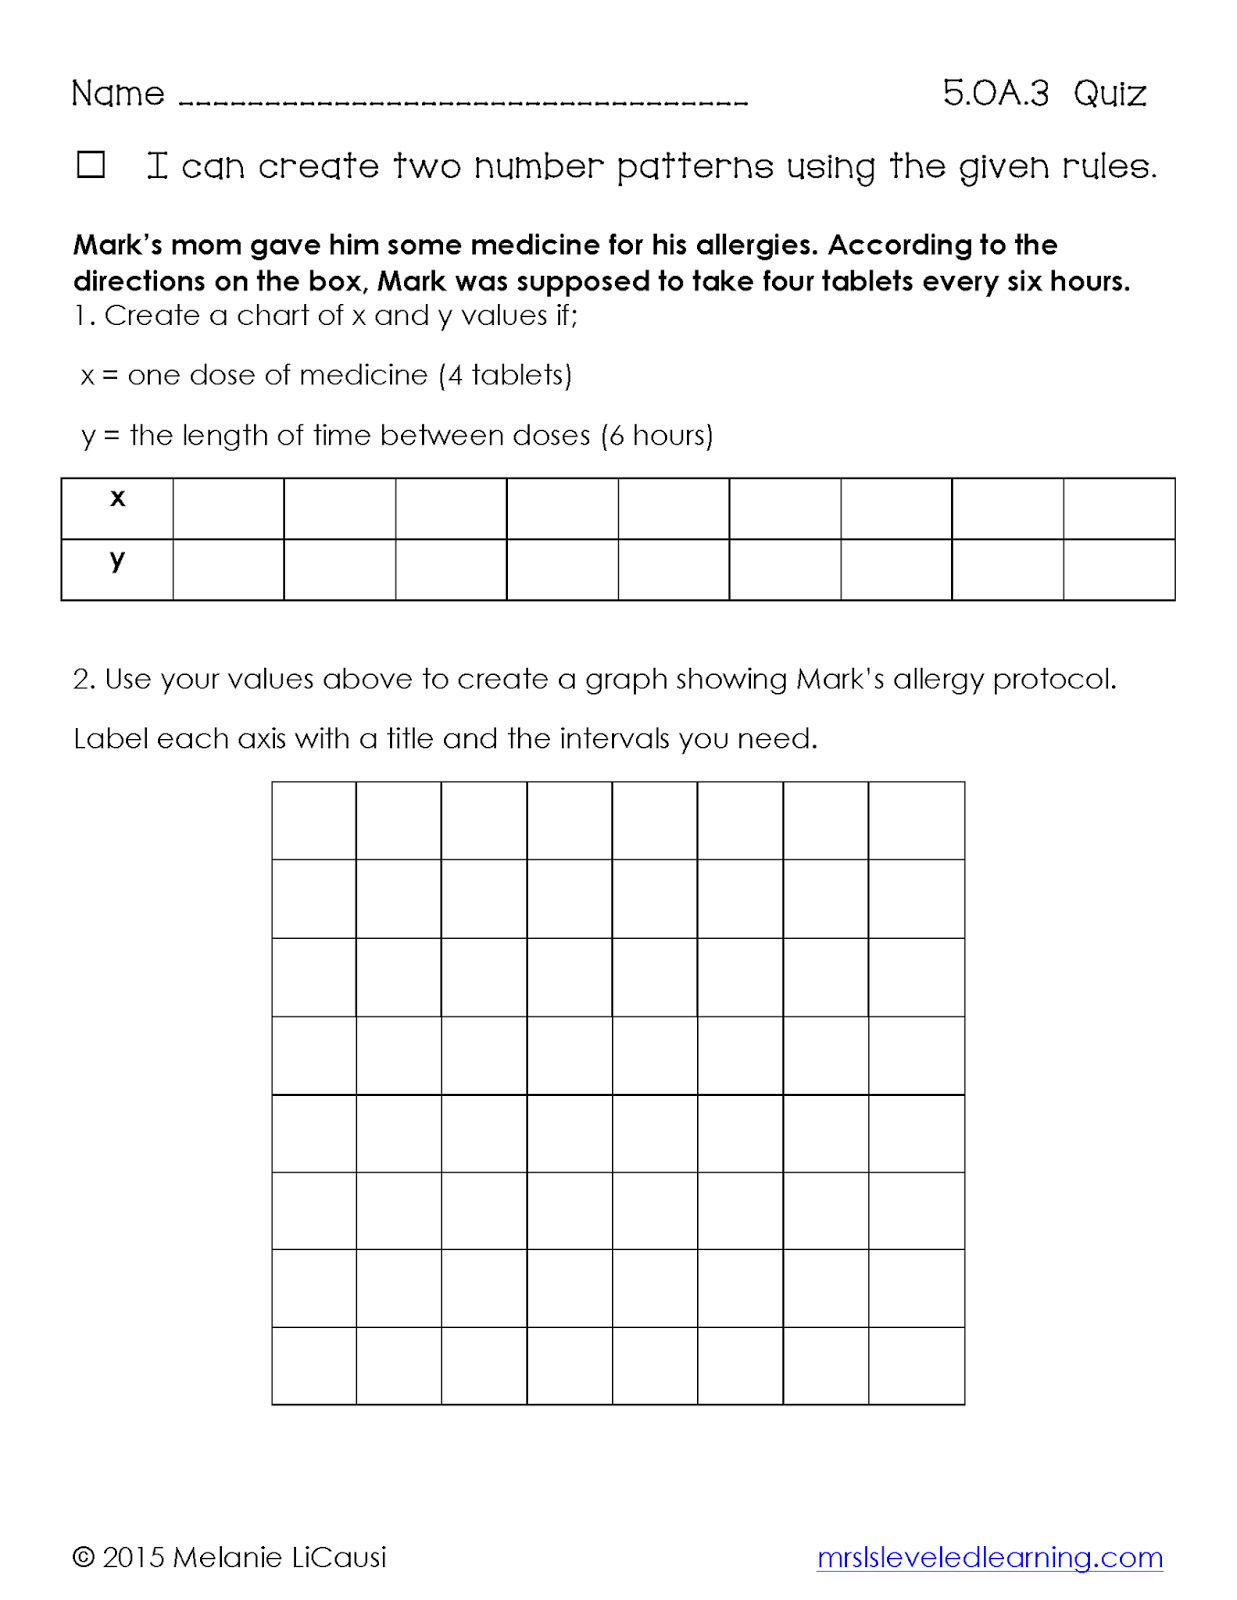 Common Core Grade 5 Math with Decimal Operations Image